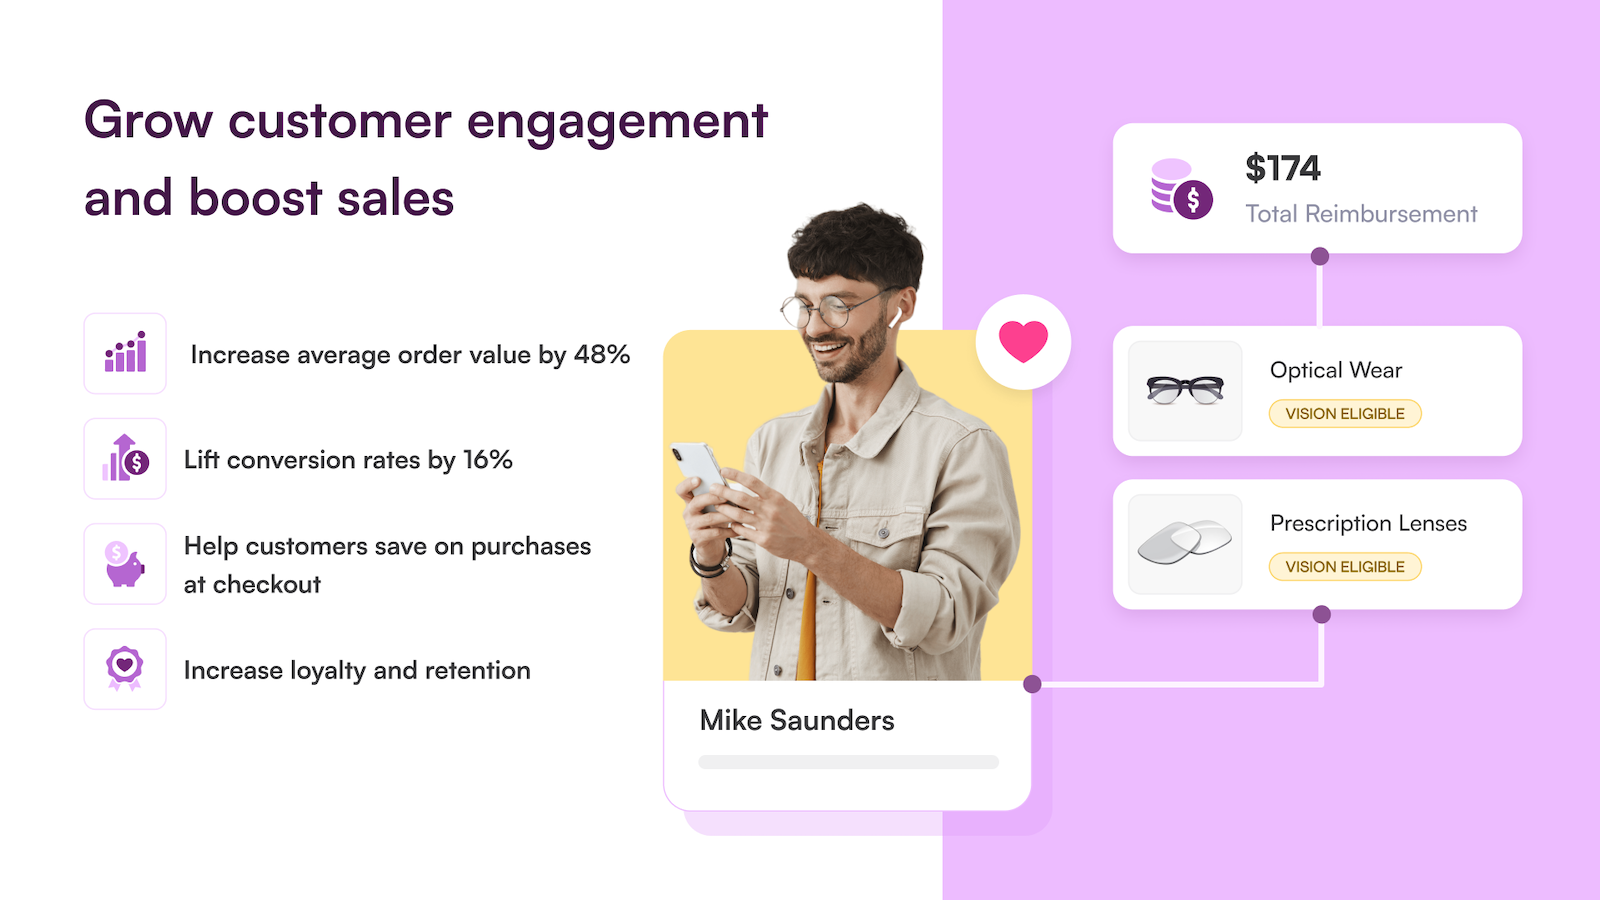 Grow customer engagement and boost sales